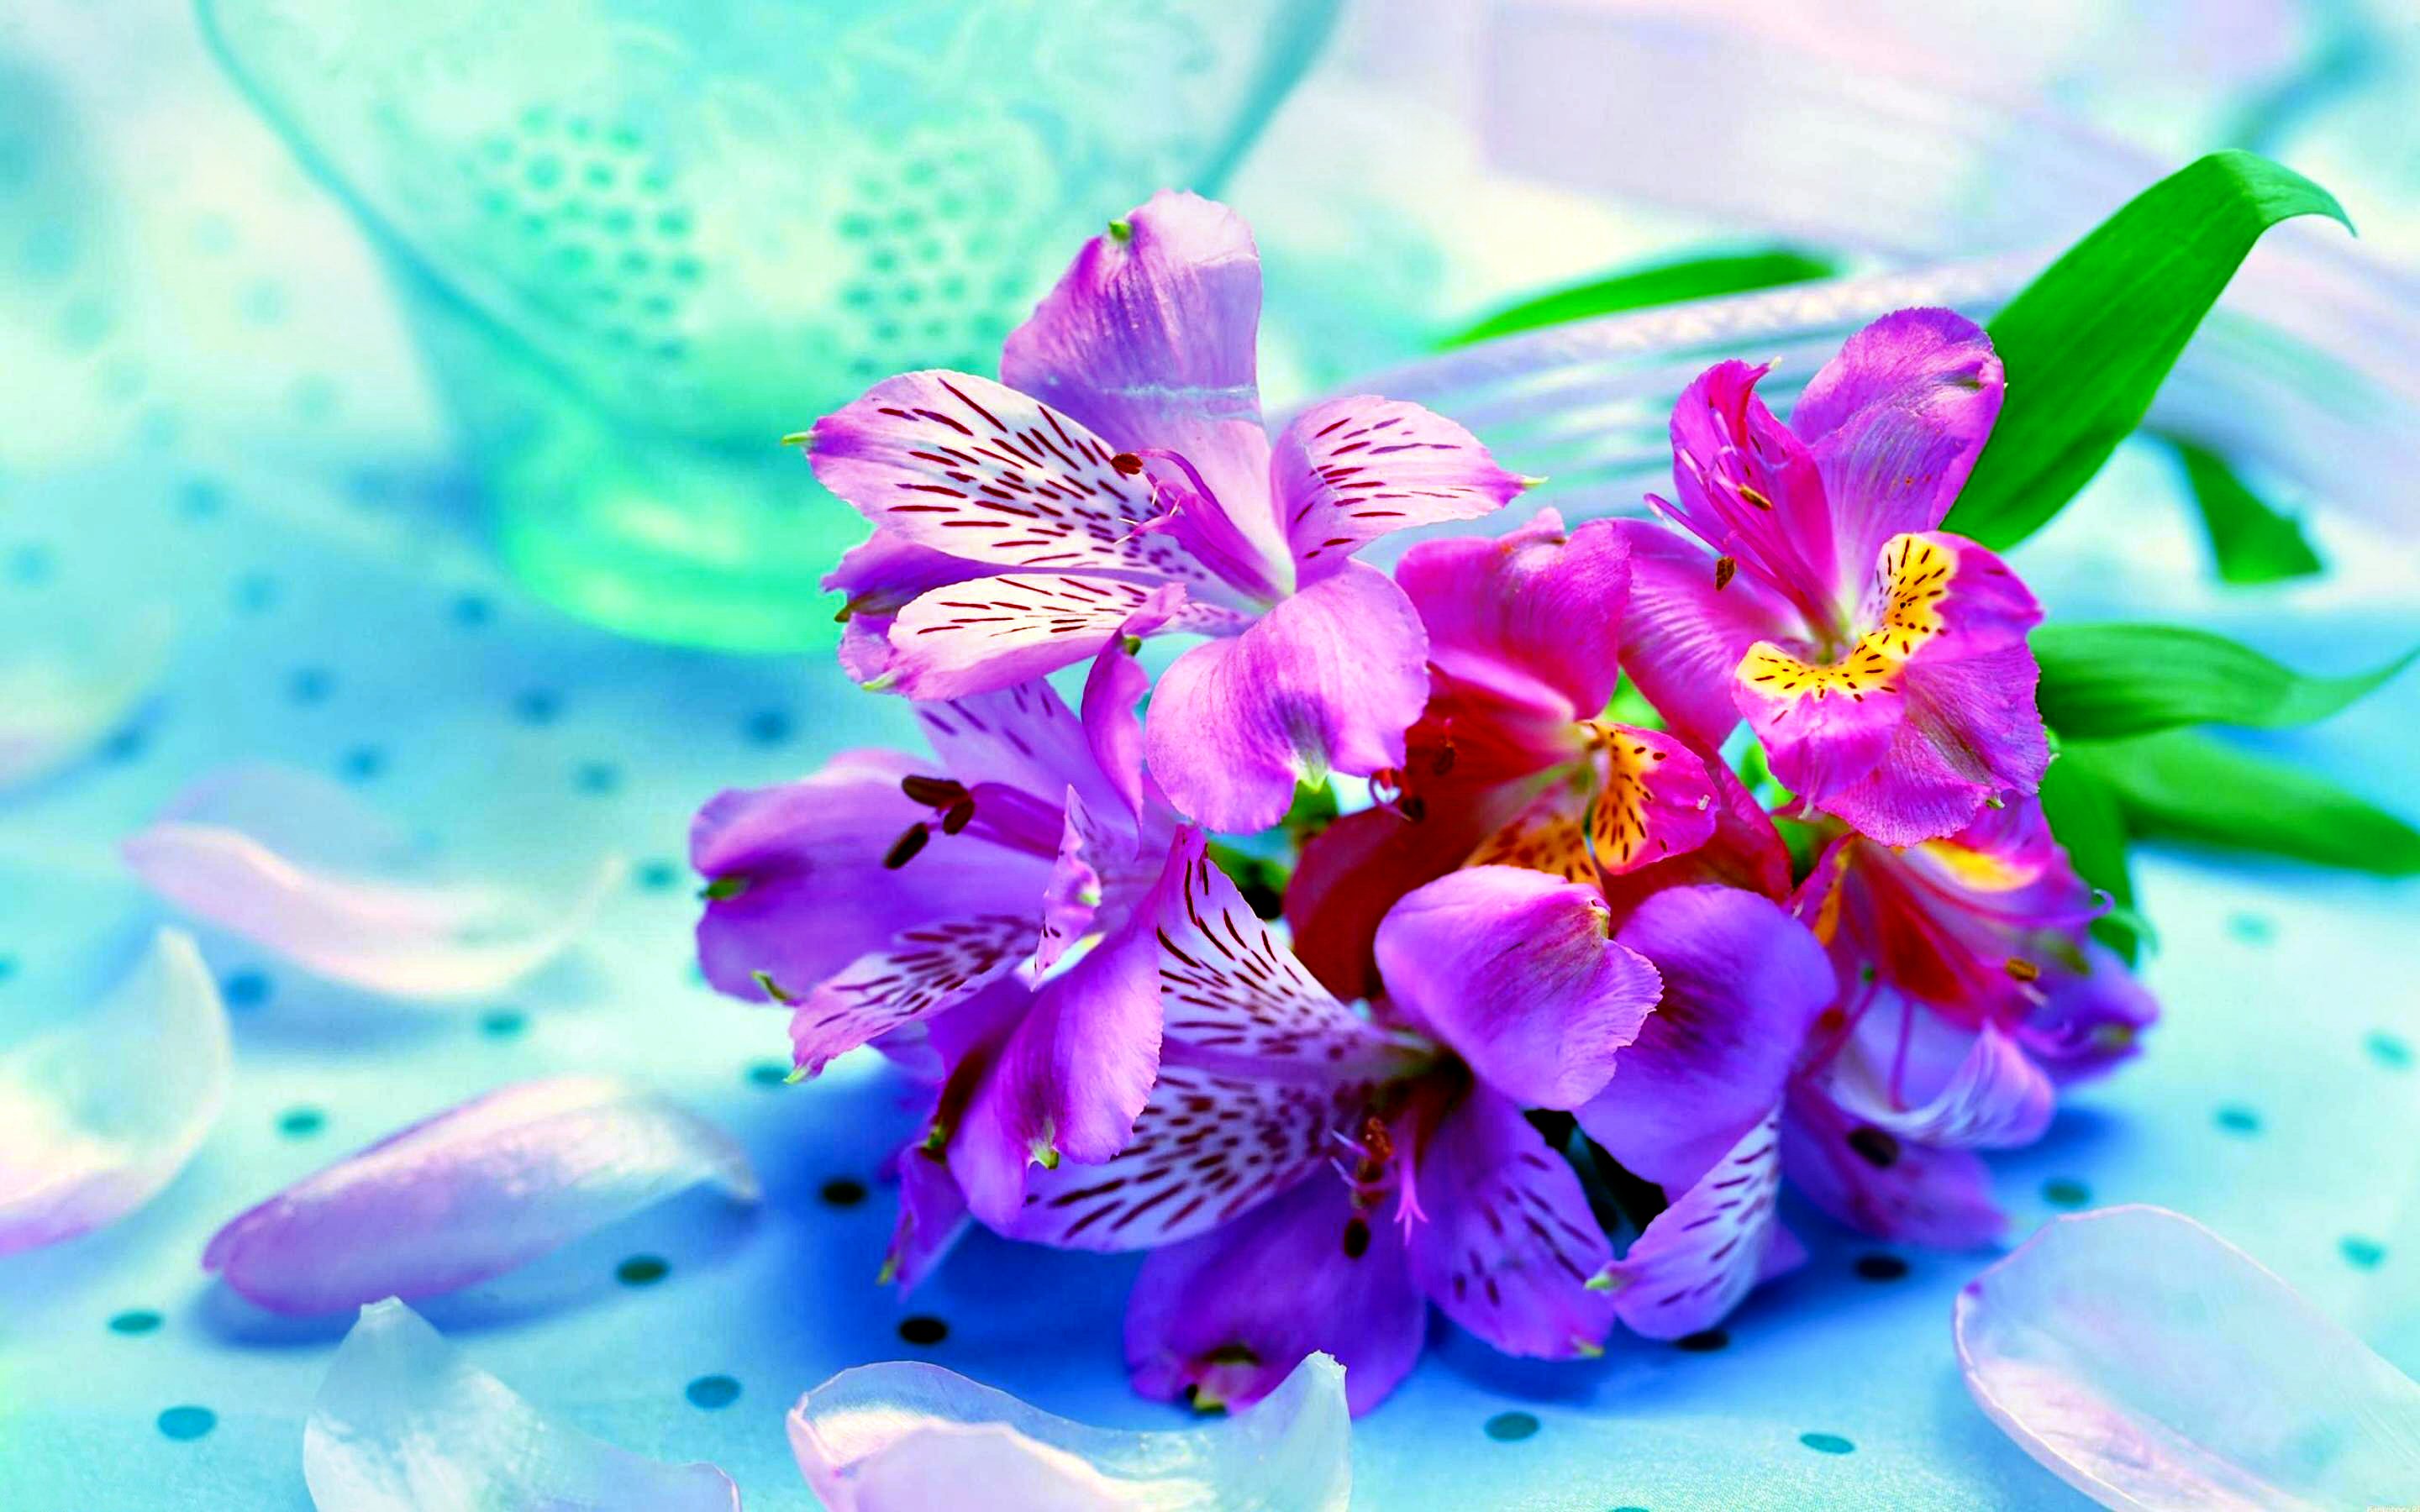 8889 Flower HD Wallpapers | Backgrounds - Wallpaper Abyss